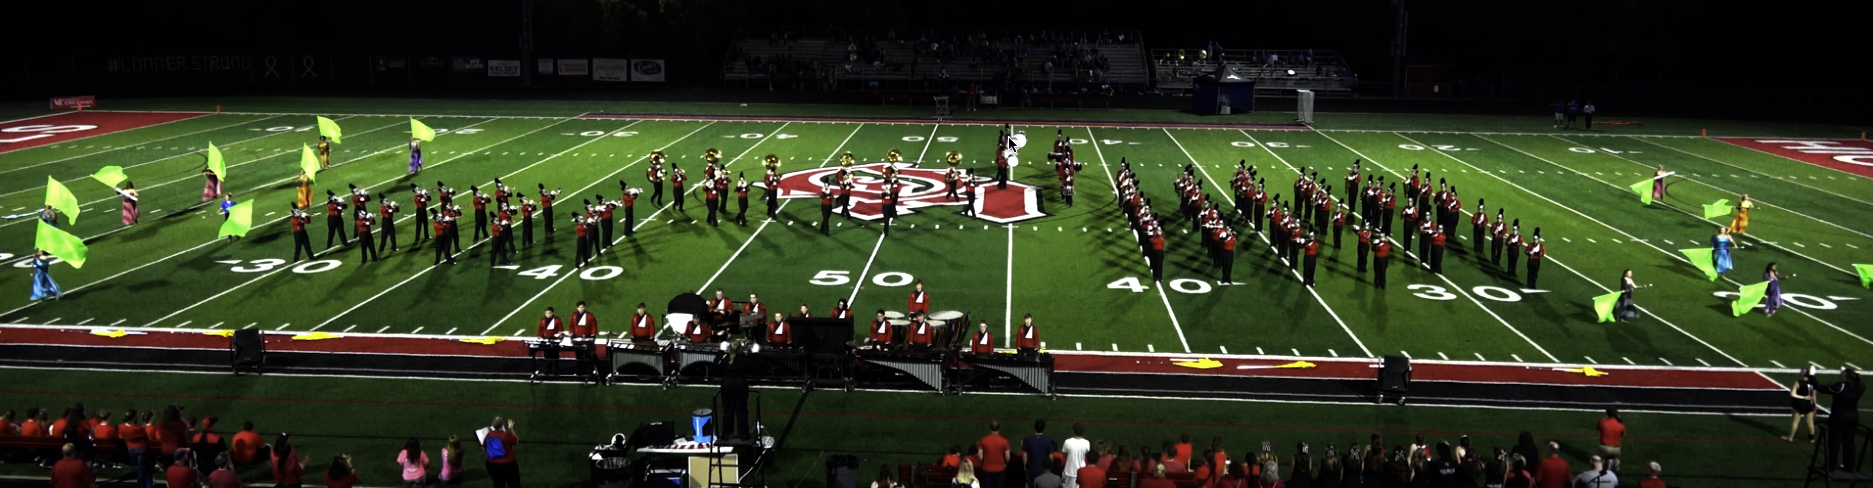 band on football field